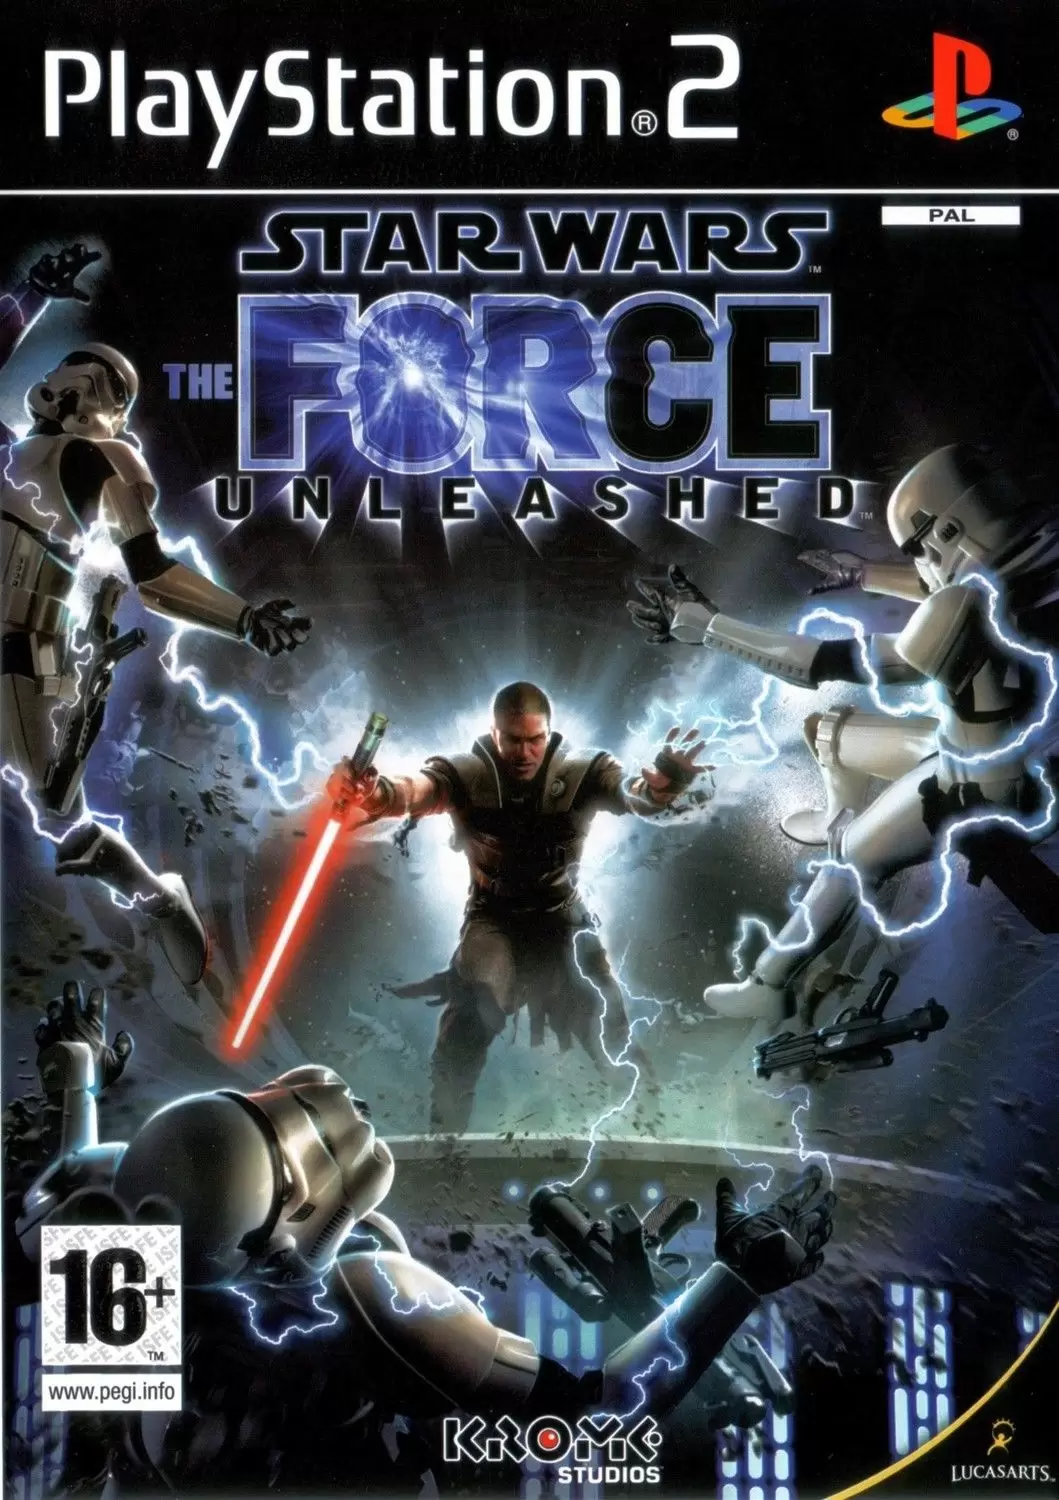 PS2 Games - Star Wars: The Force Unleashed